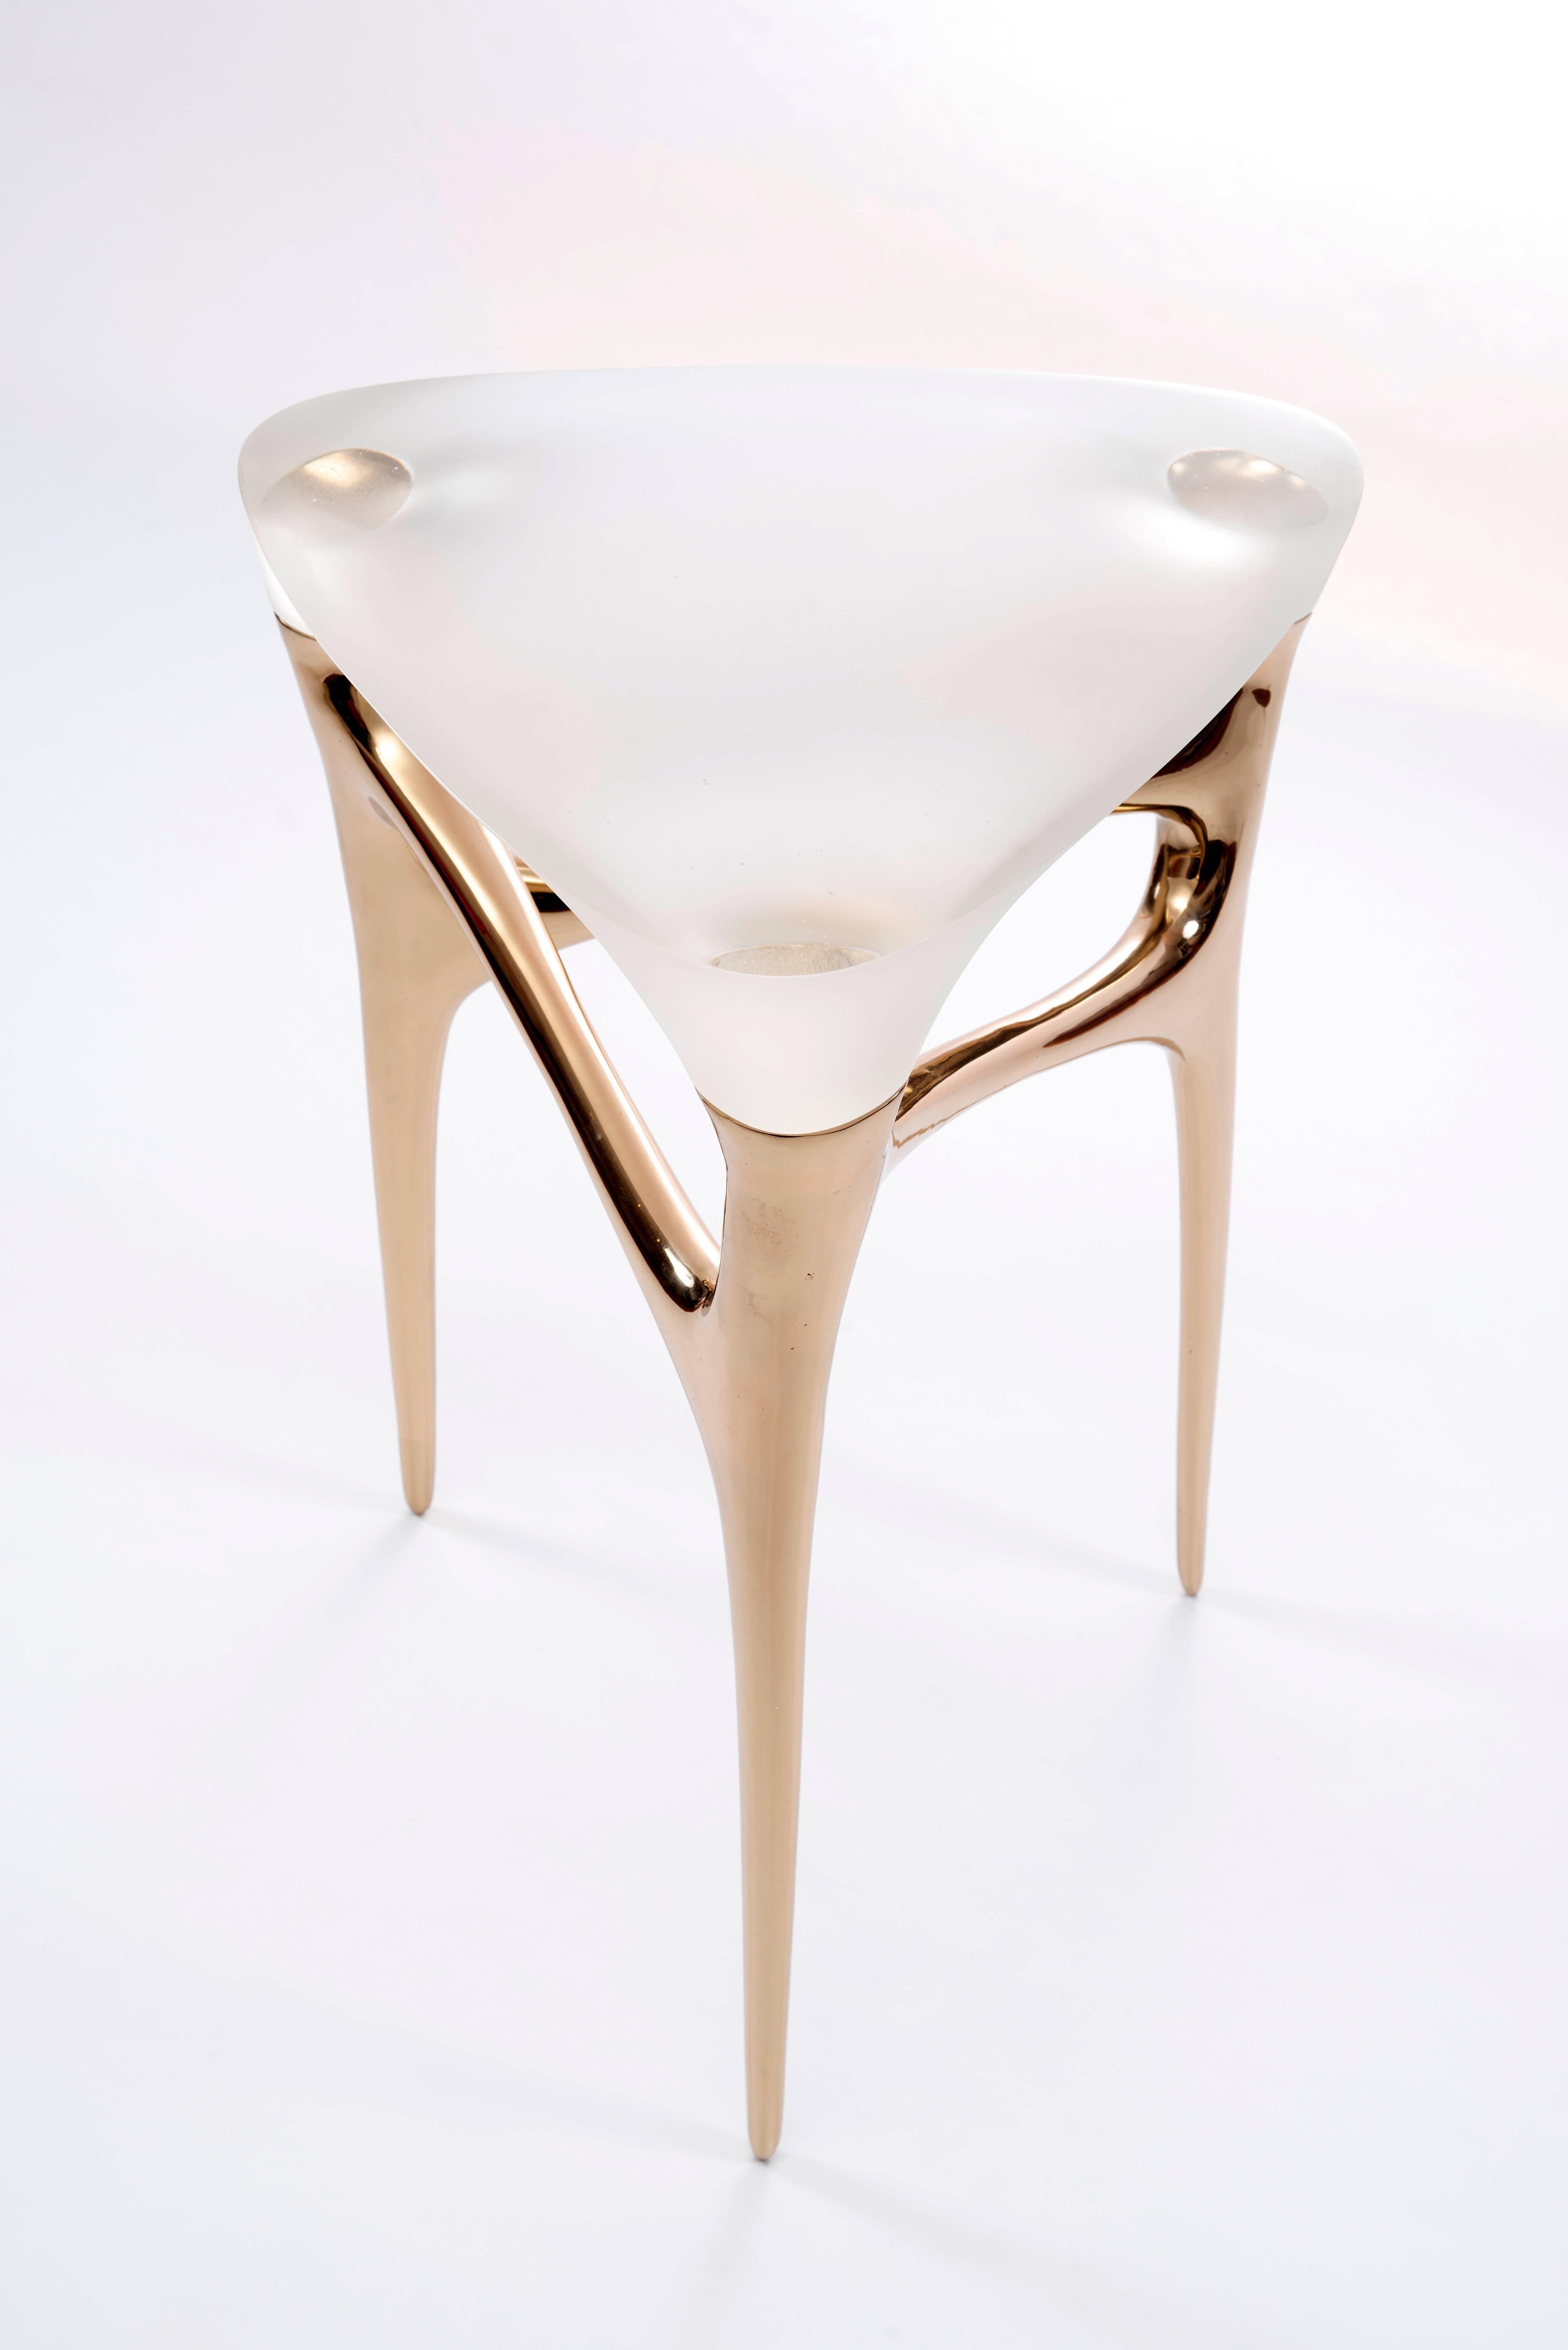 Cast bronze and cast glass side table by German designer Timothy Schreiber.

Timothy Schreiber initially trained in cabinet making in Germany before studying architecture and design at Bauhaus University, Weimar (Germany), University of Stuttgart